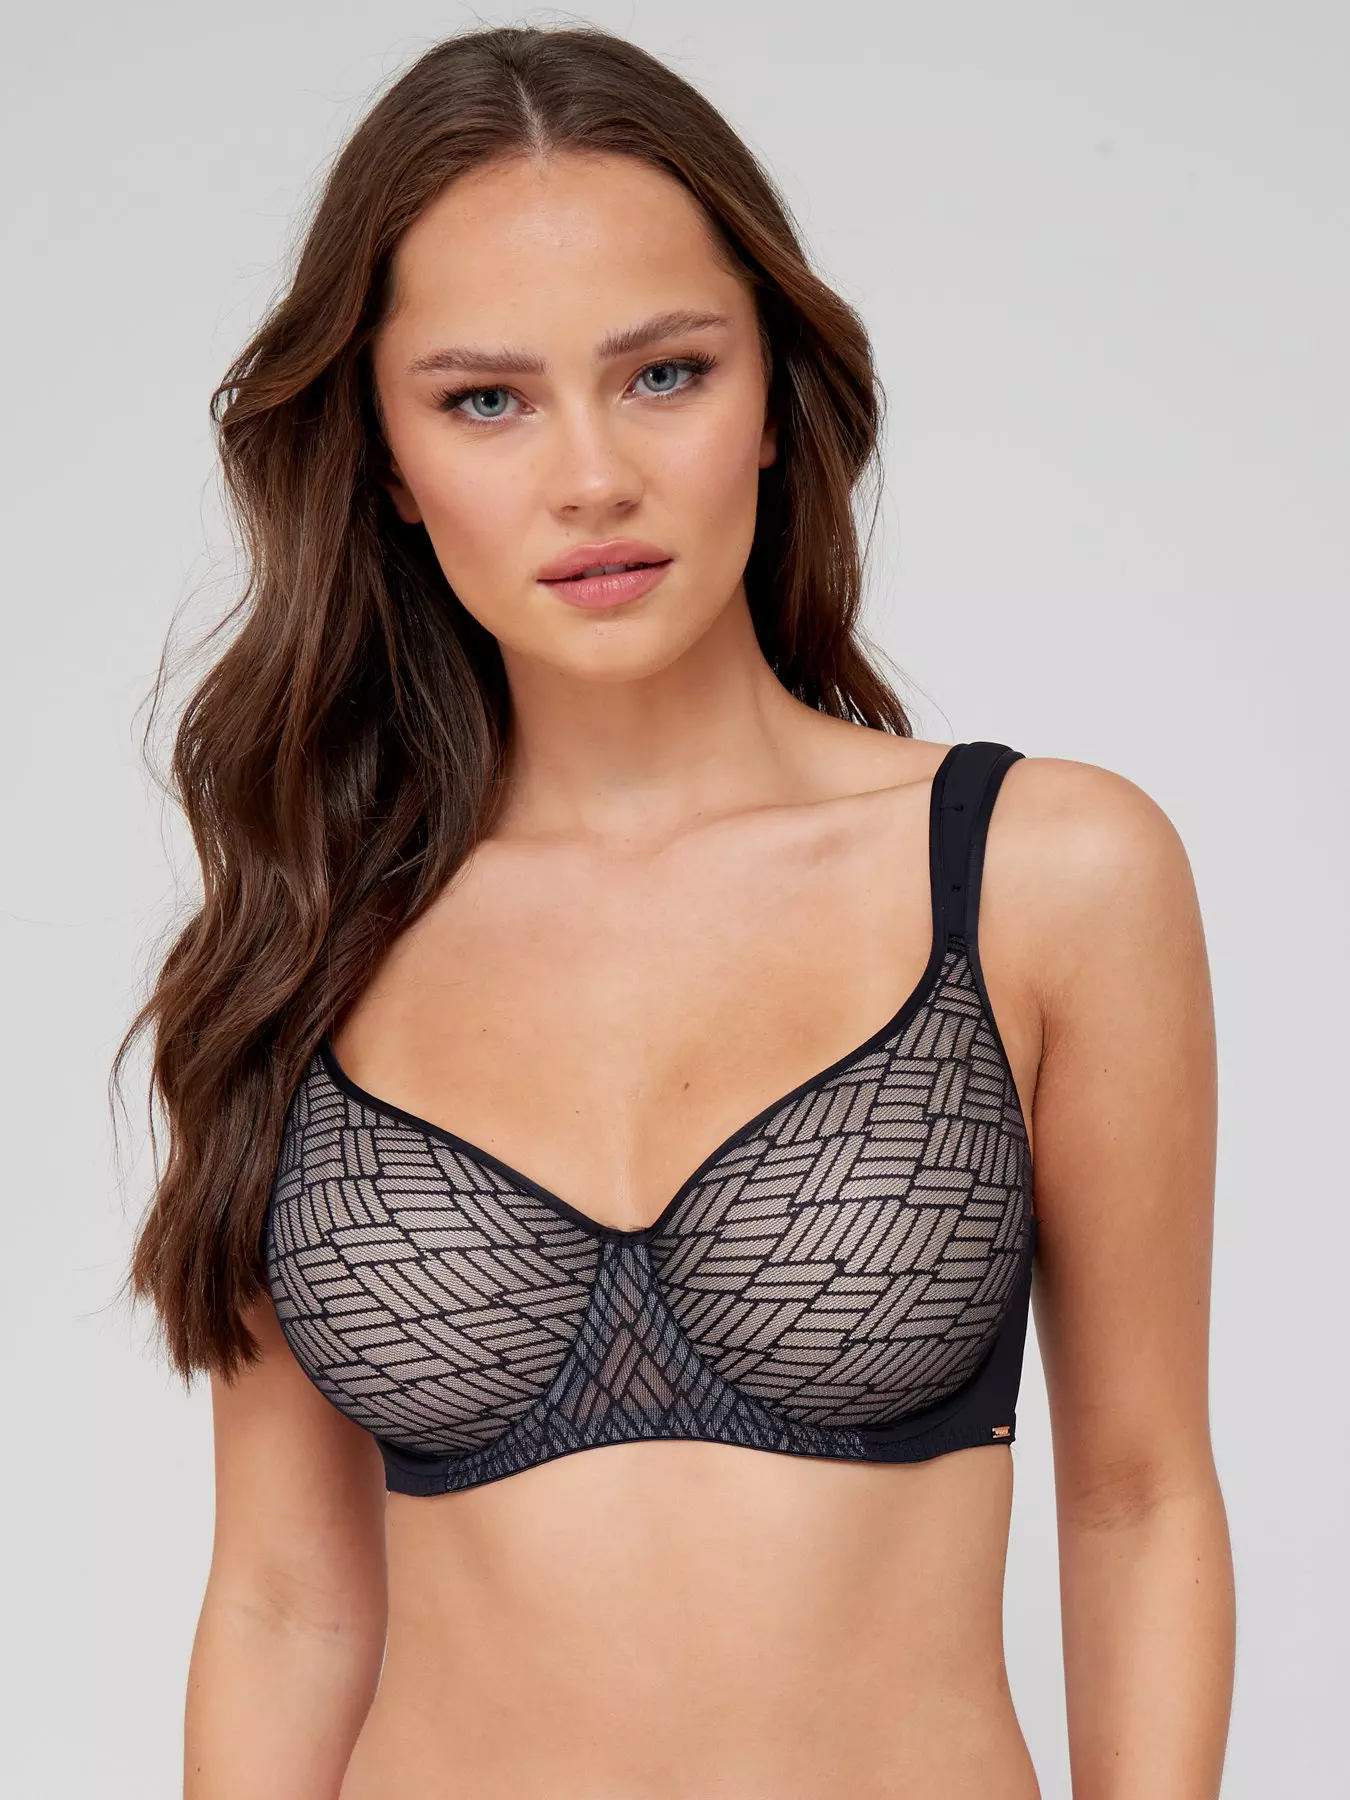 Hfyihgf On Clearance Women's Full-Coverage Bras Pure Soft Comfort